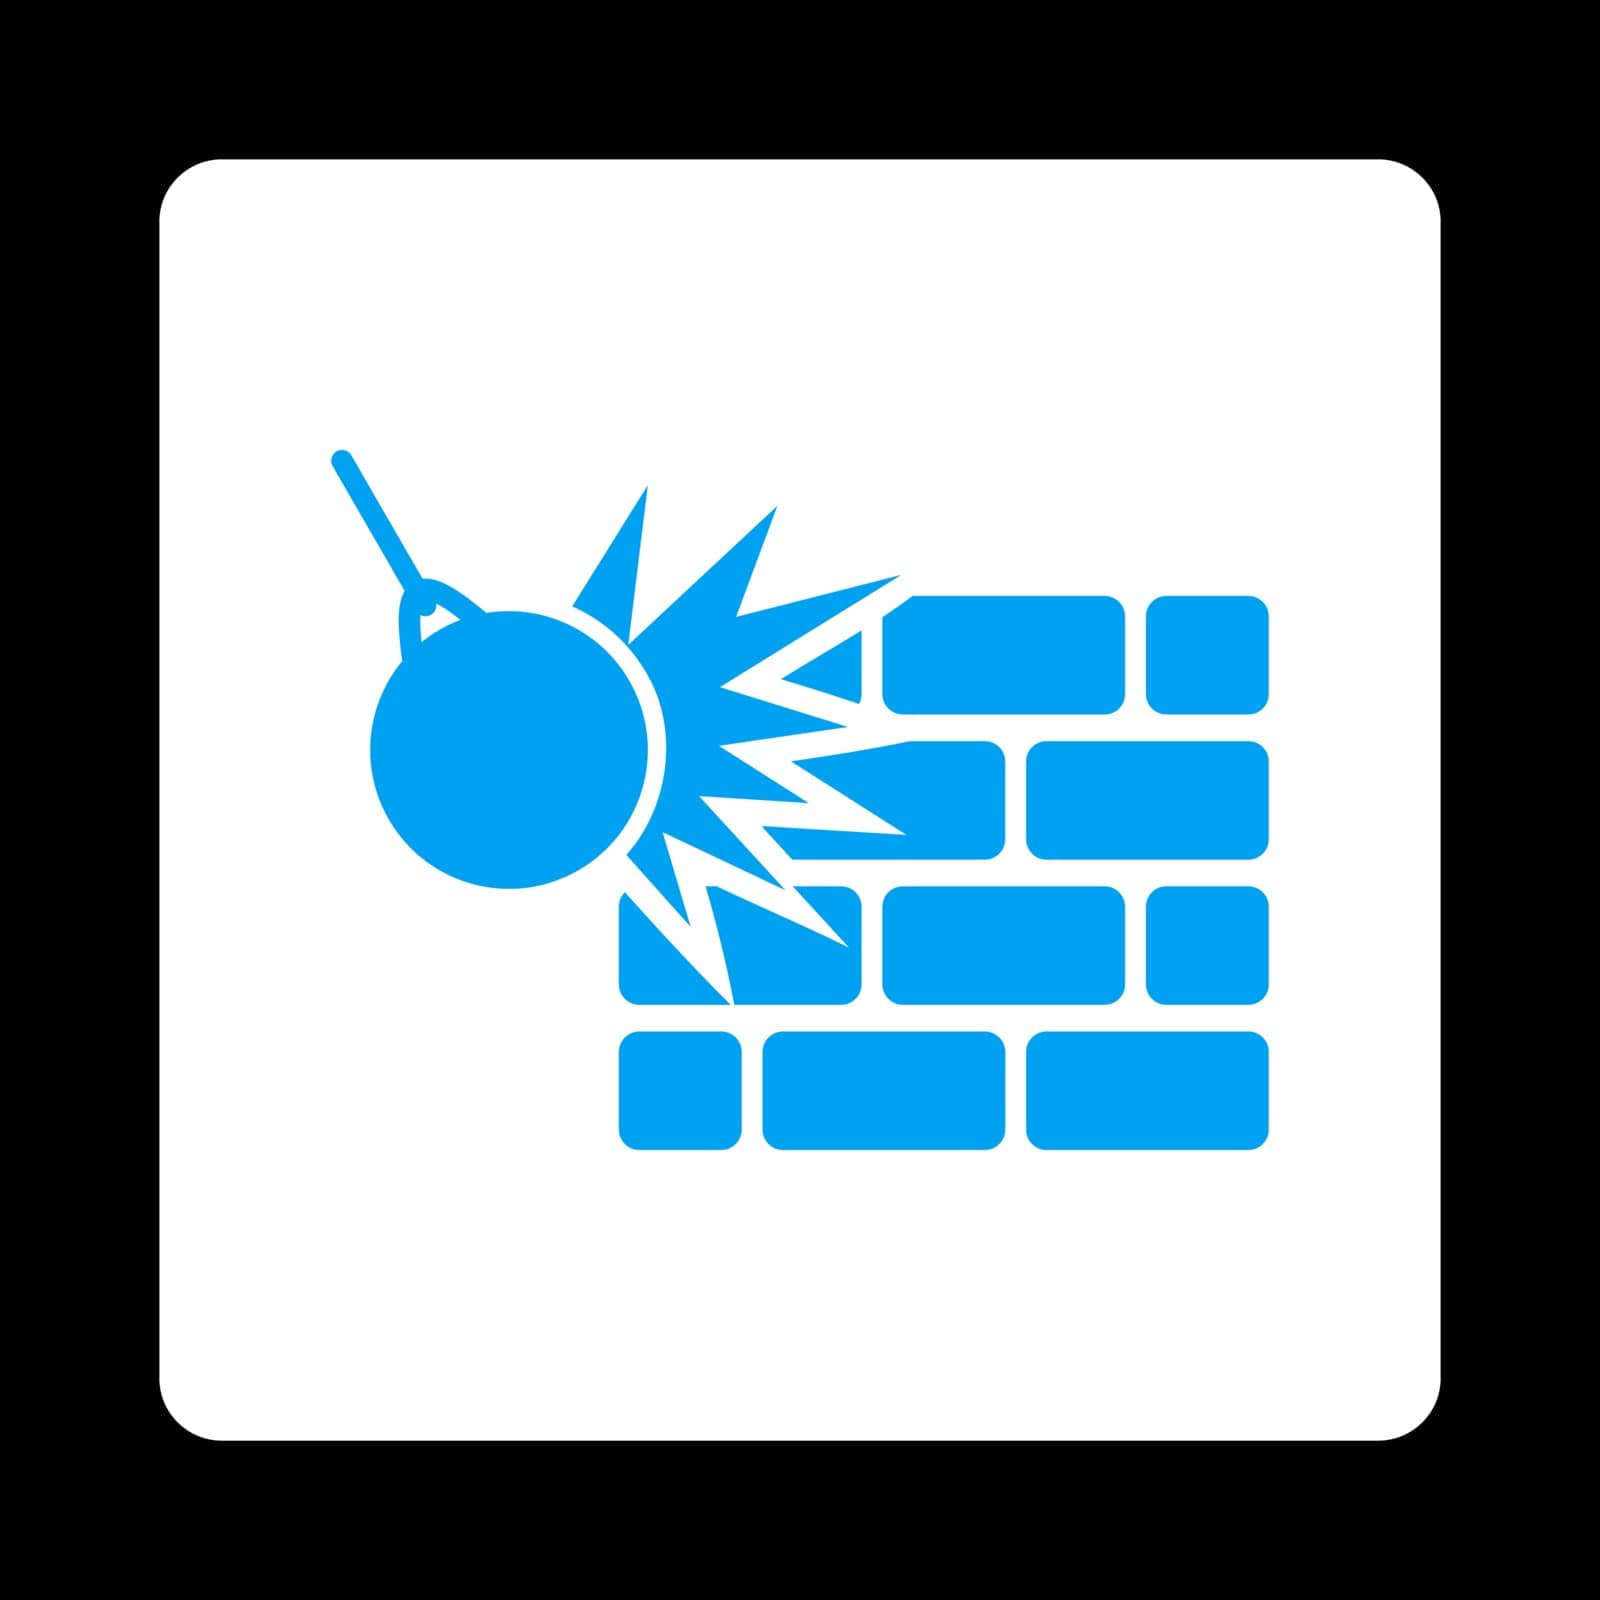 Destruction icon. Vector style is blue and white colors, flat rounded square button on a black background.